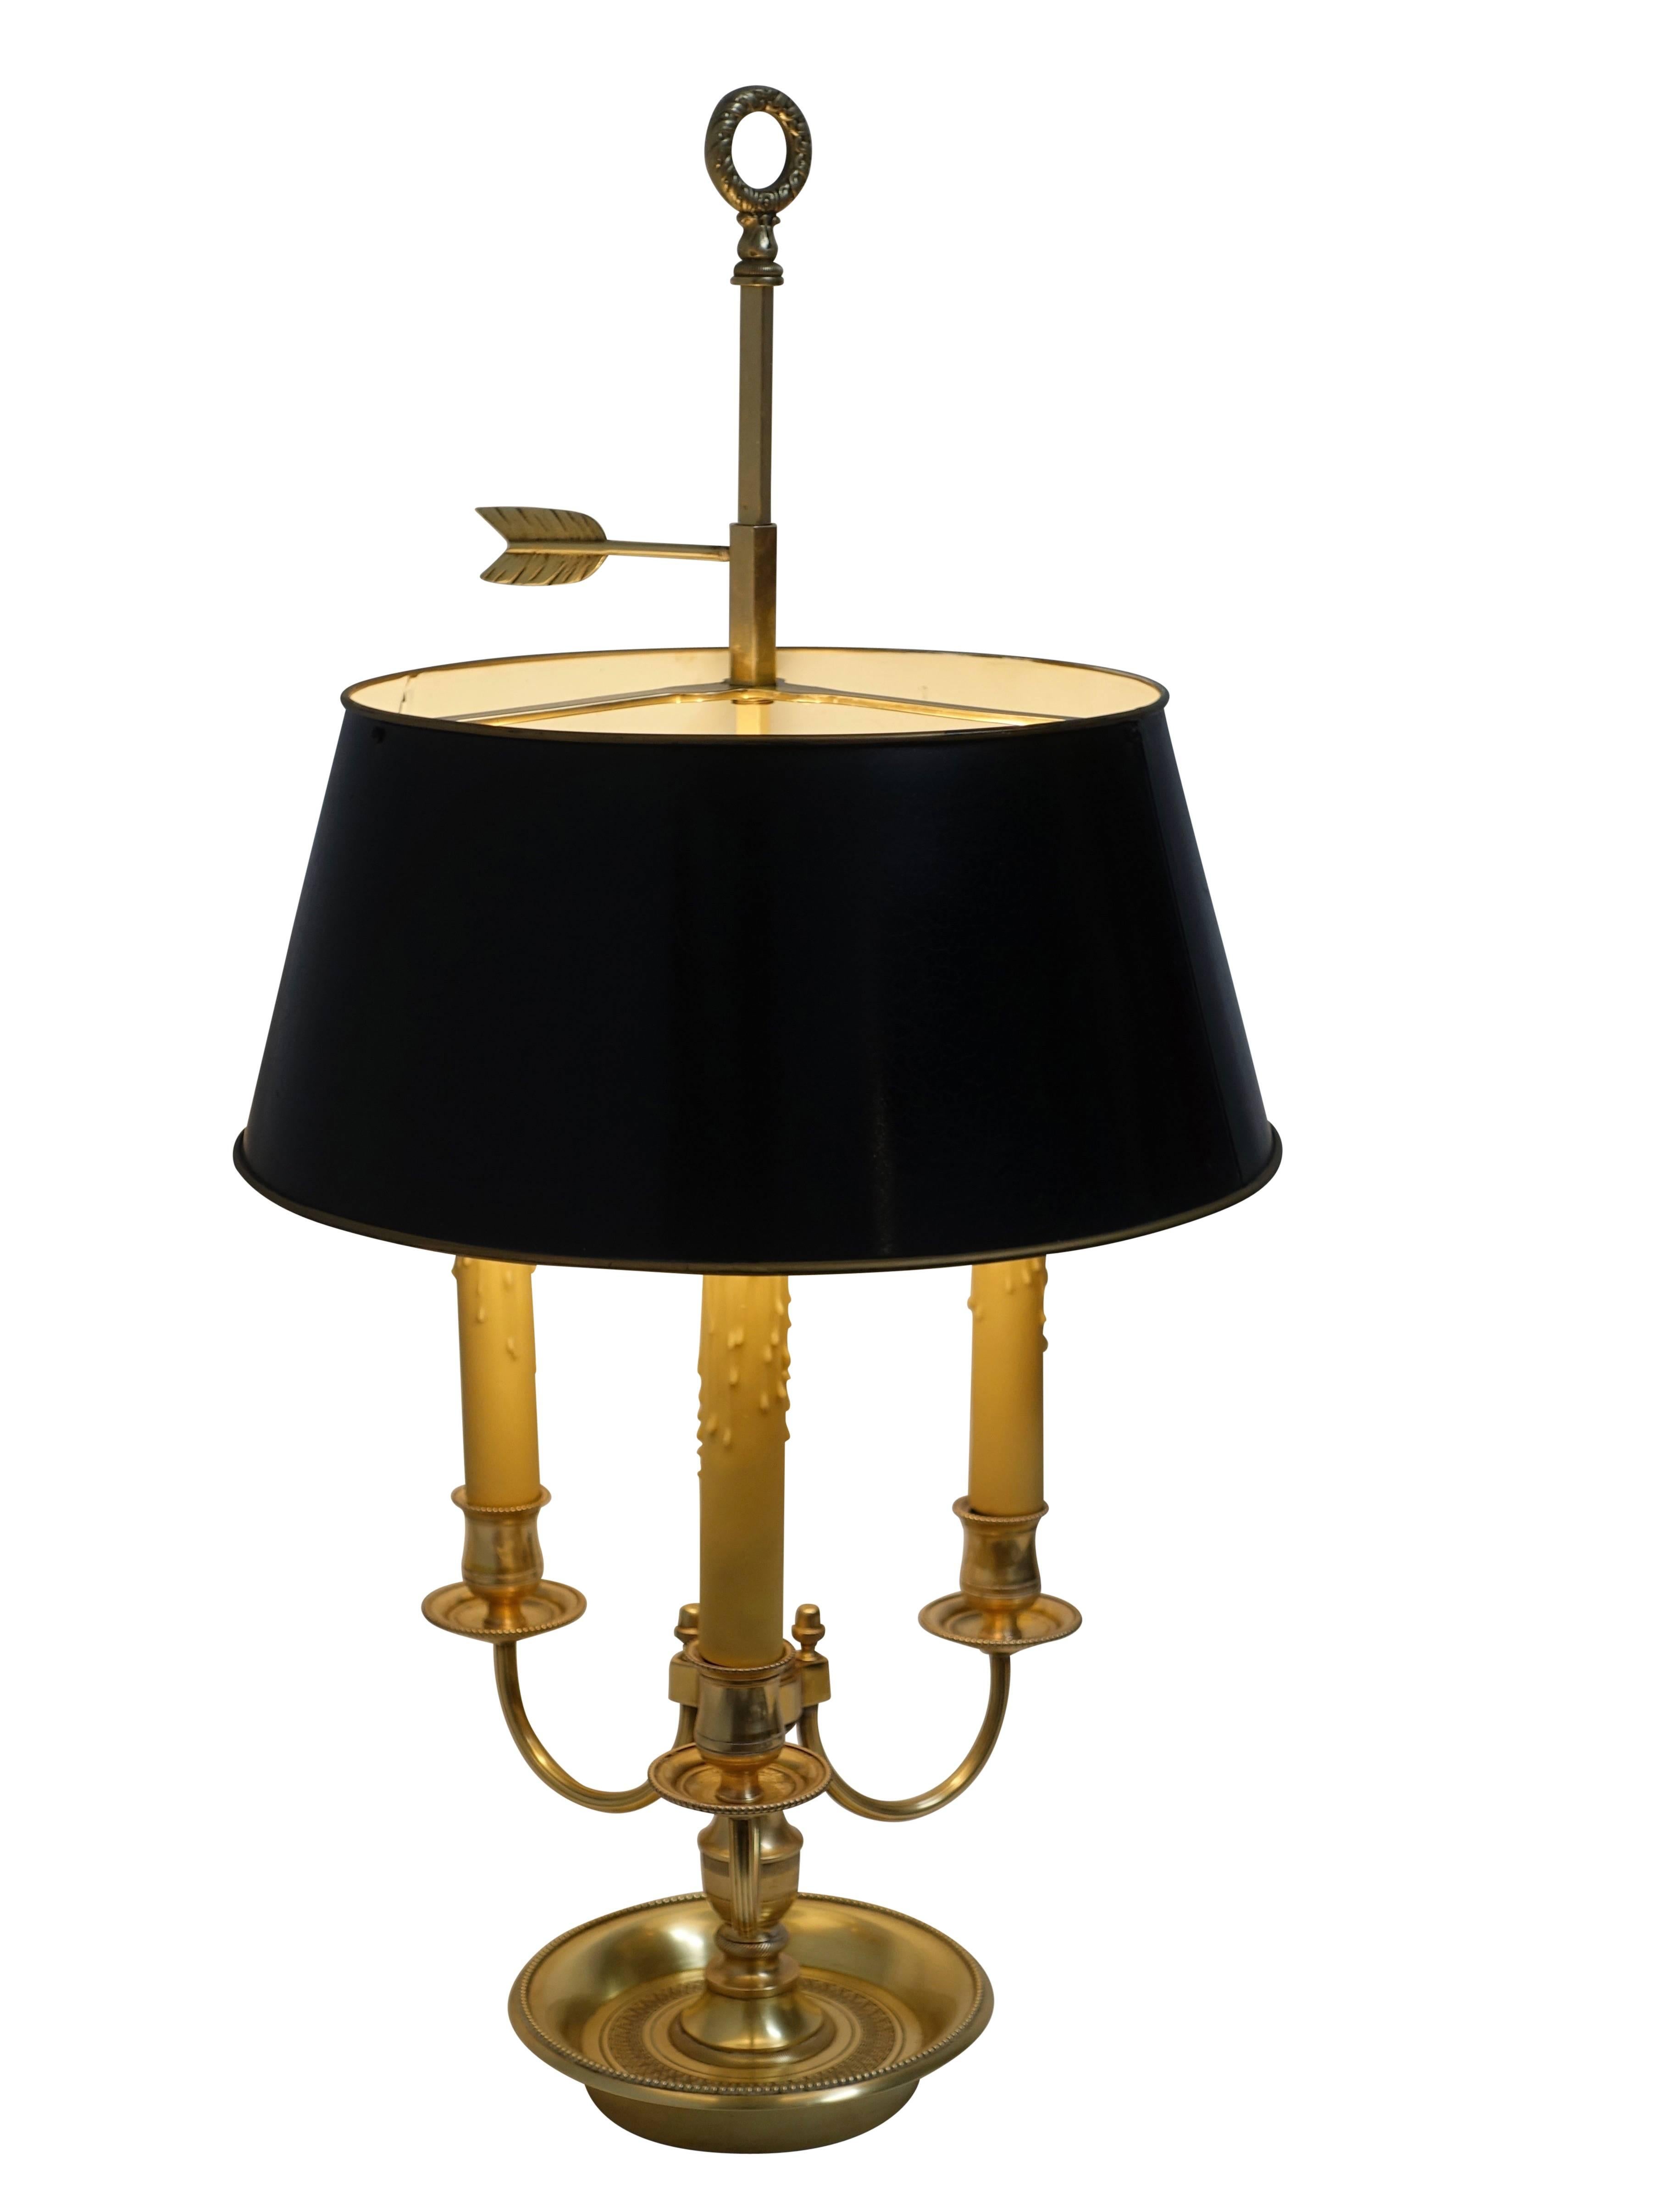 Fine quality Louis XVI style three-light bouillotte lamp with original black tole shade. The shade has an aged crackle finish. France, circa 1940.